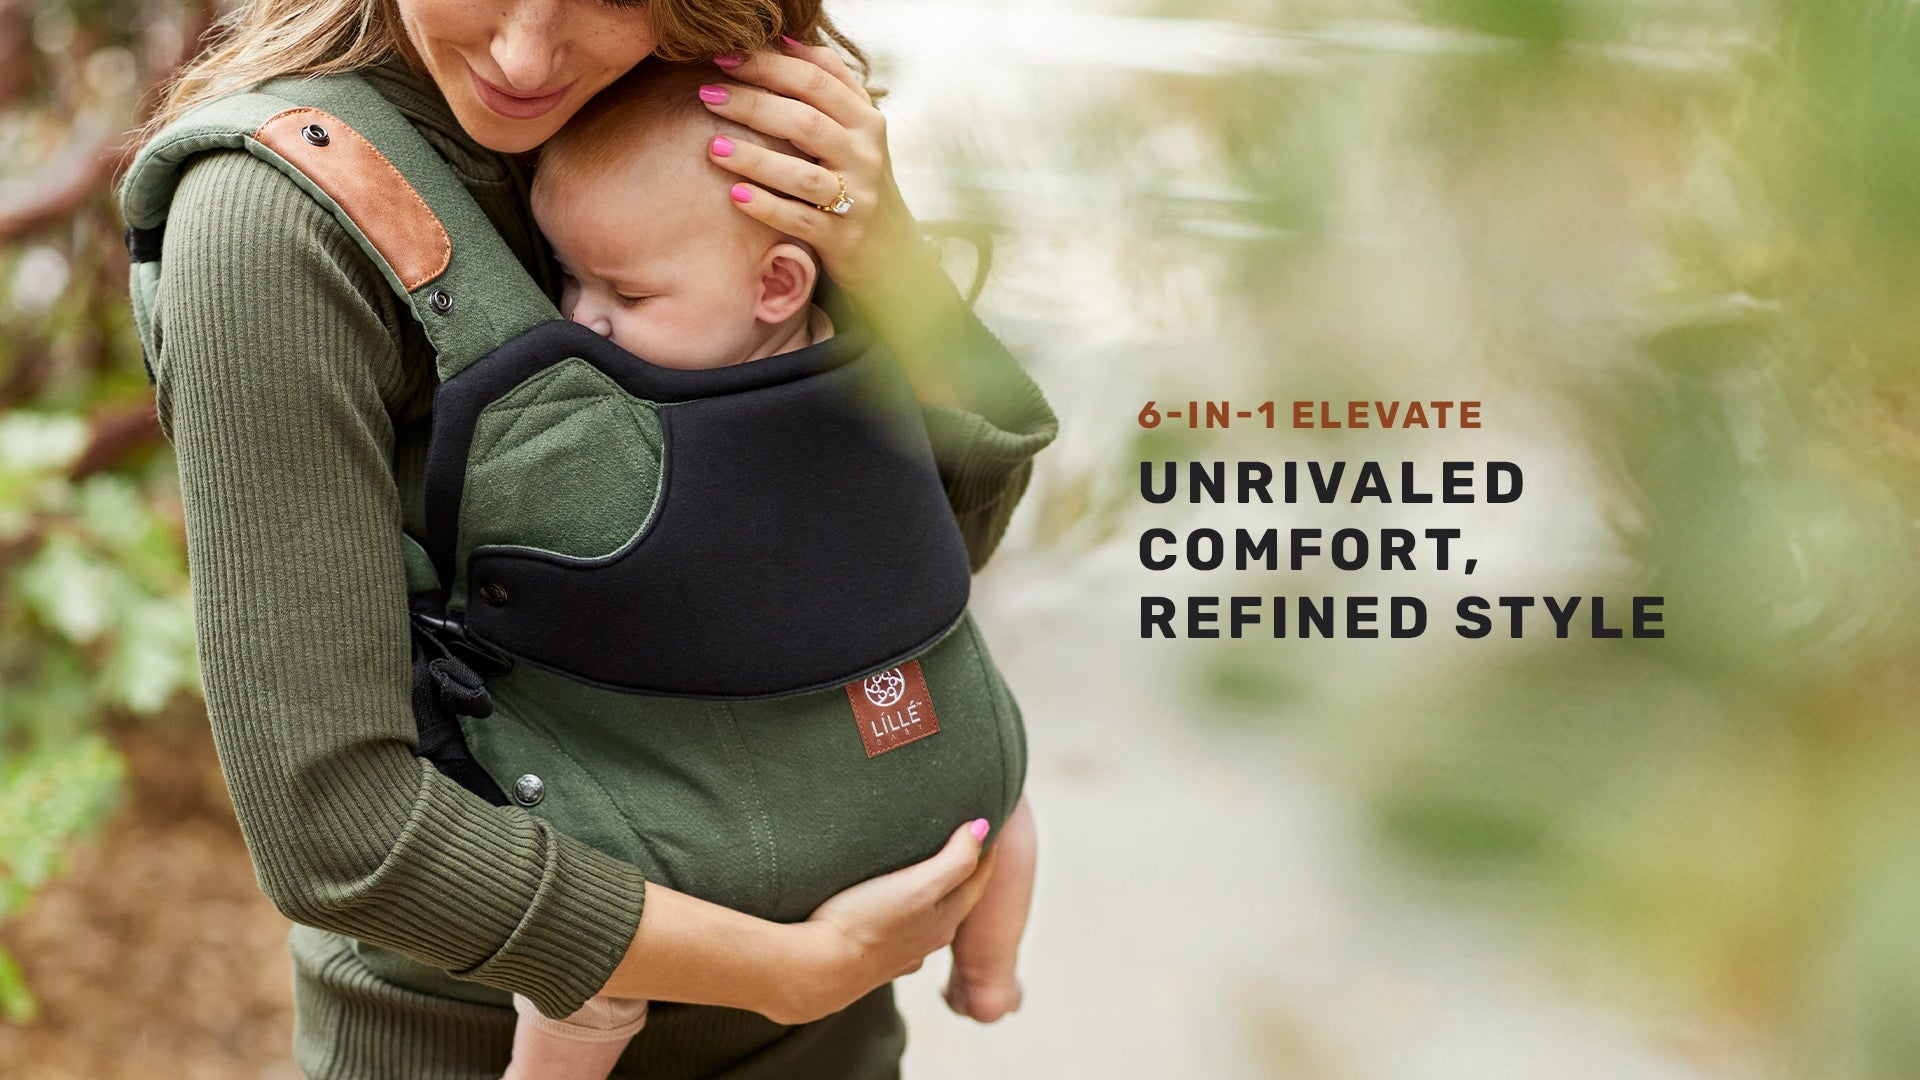 6-in-1 unrivaled comfort, refined style